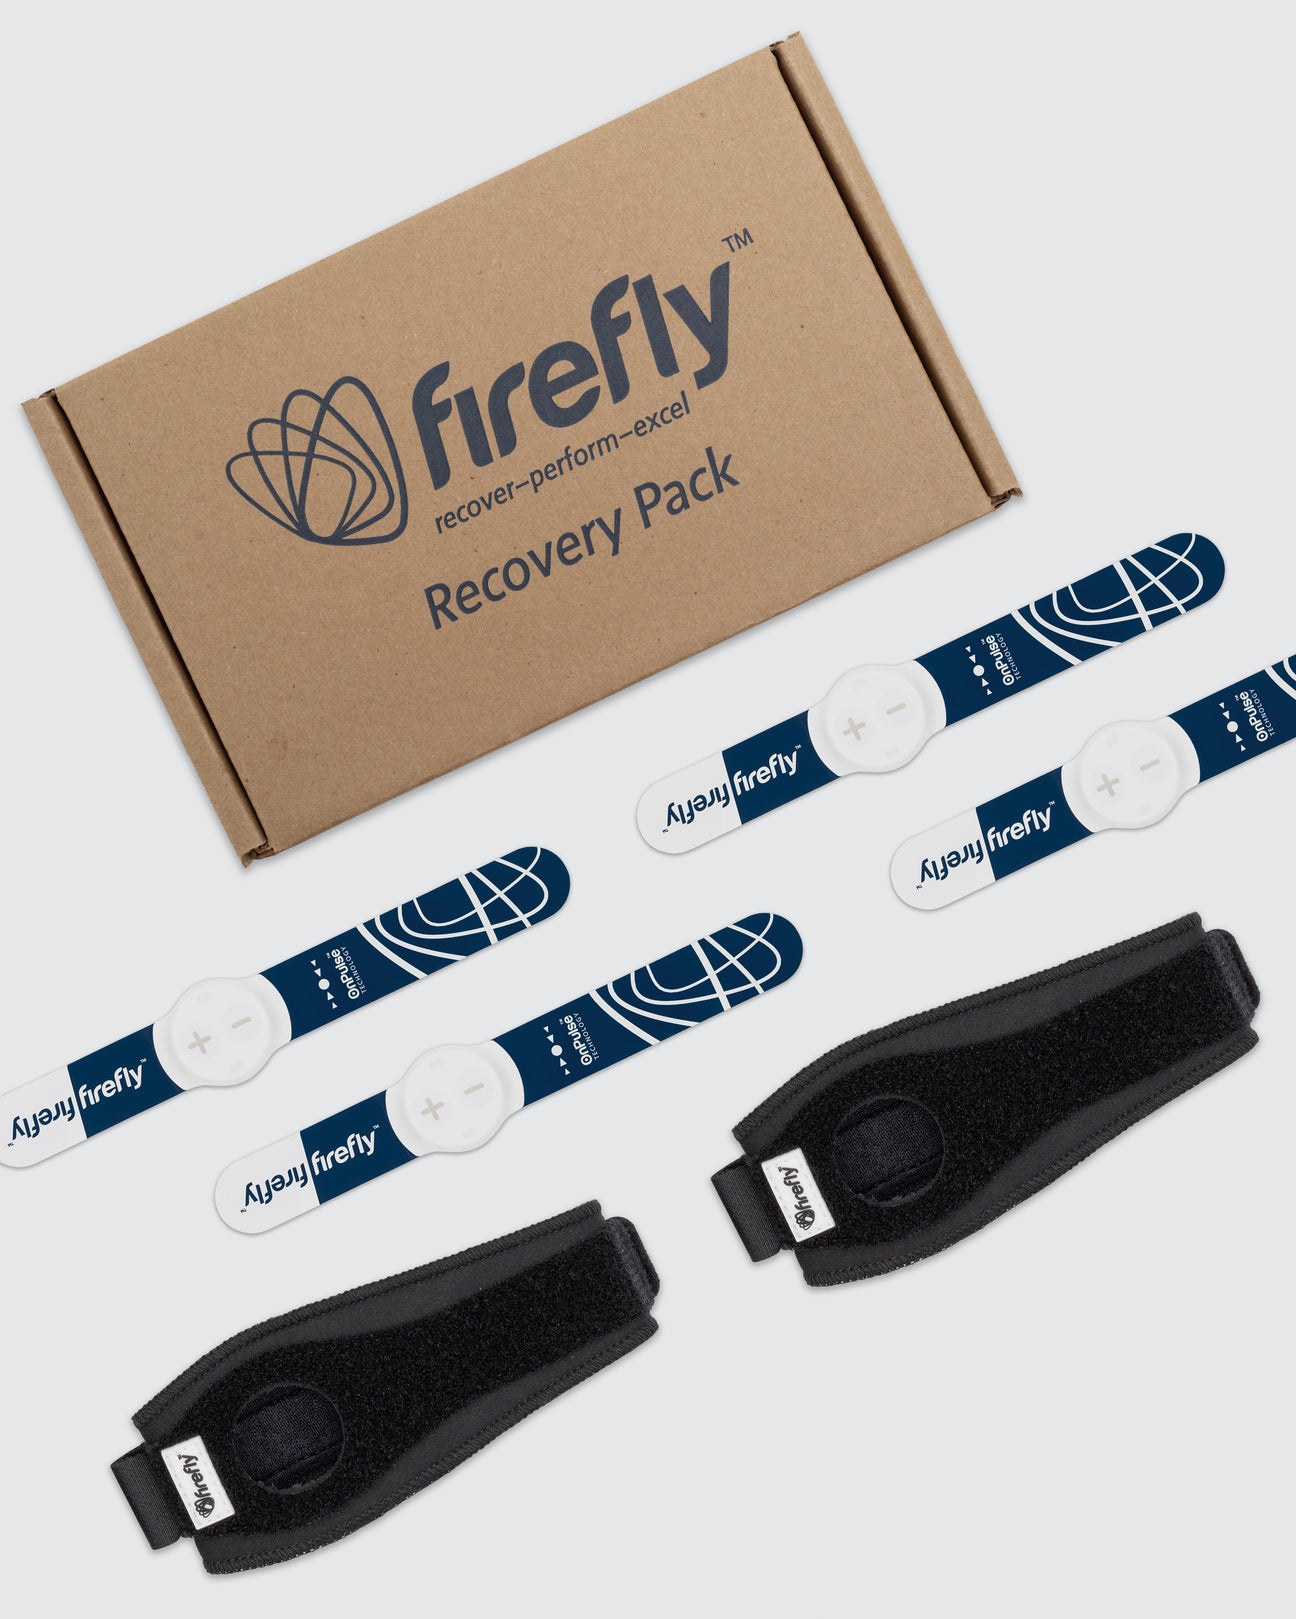 Firefly Recovery Starter Pack